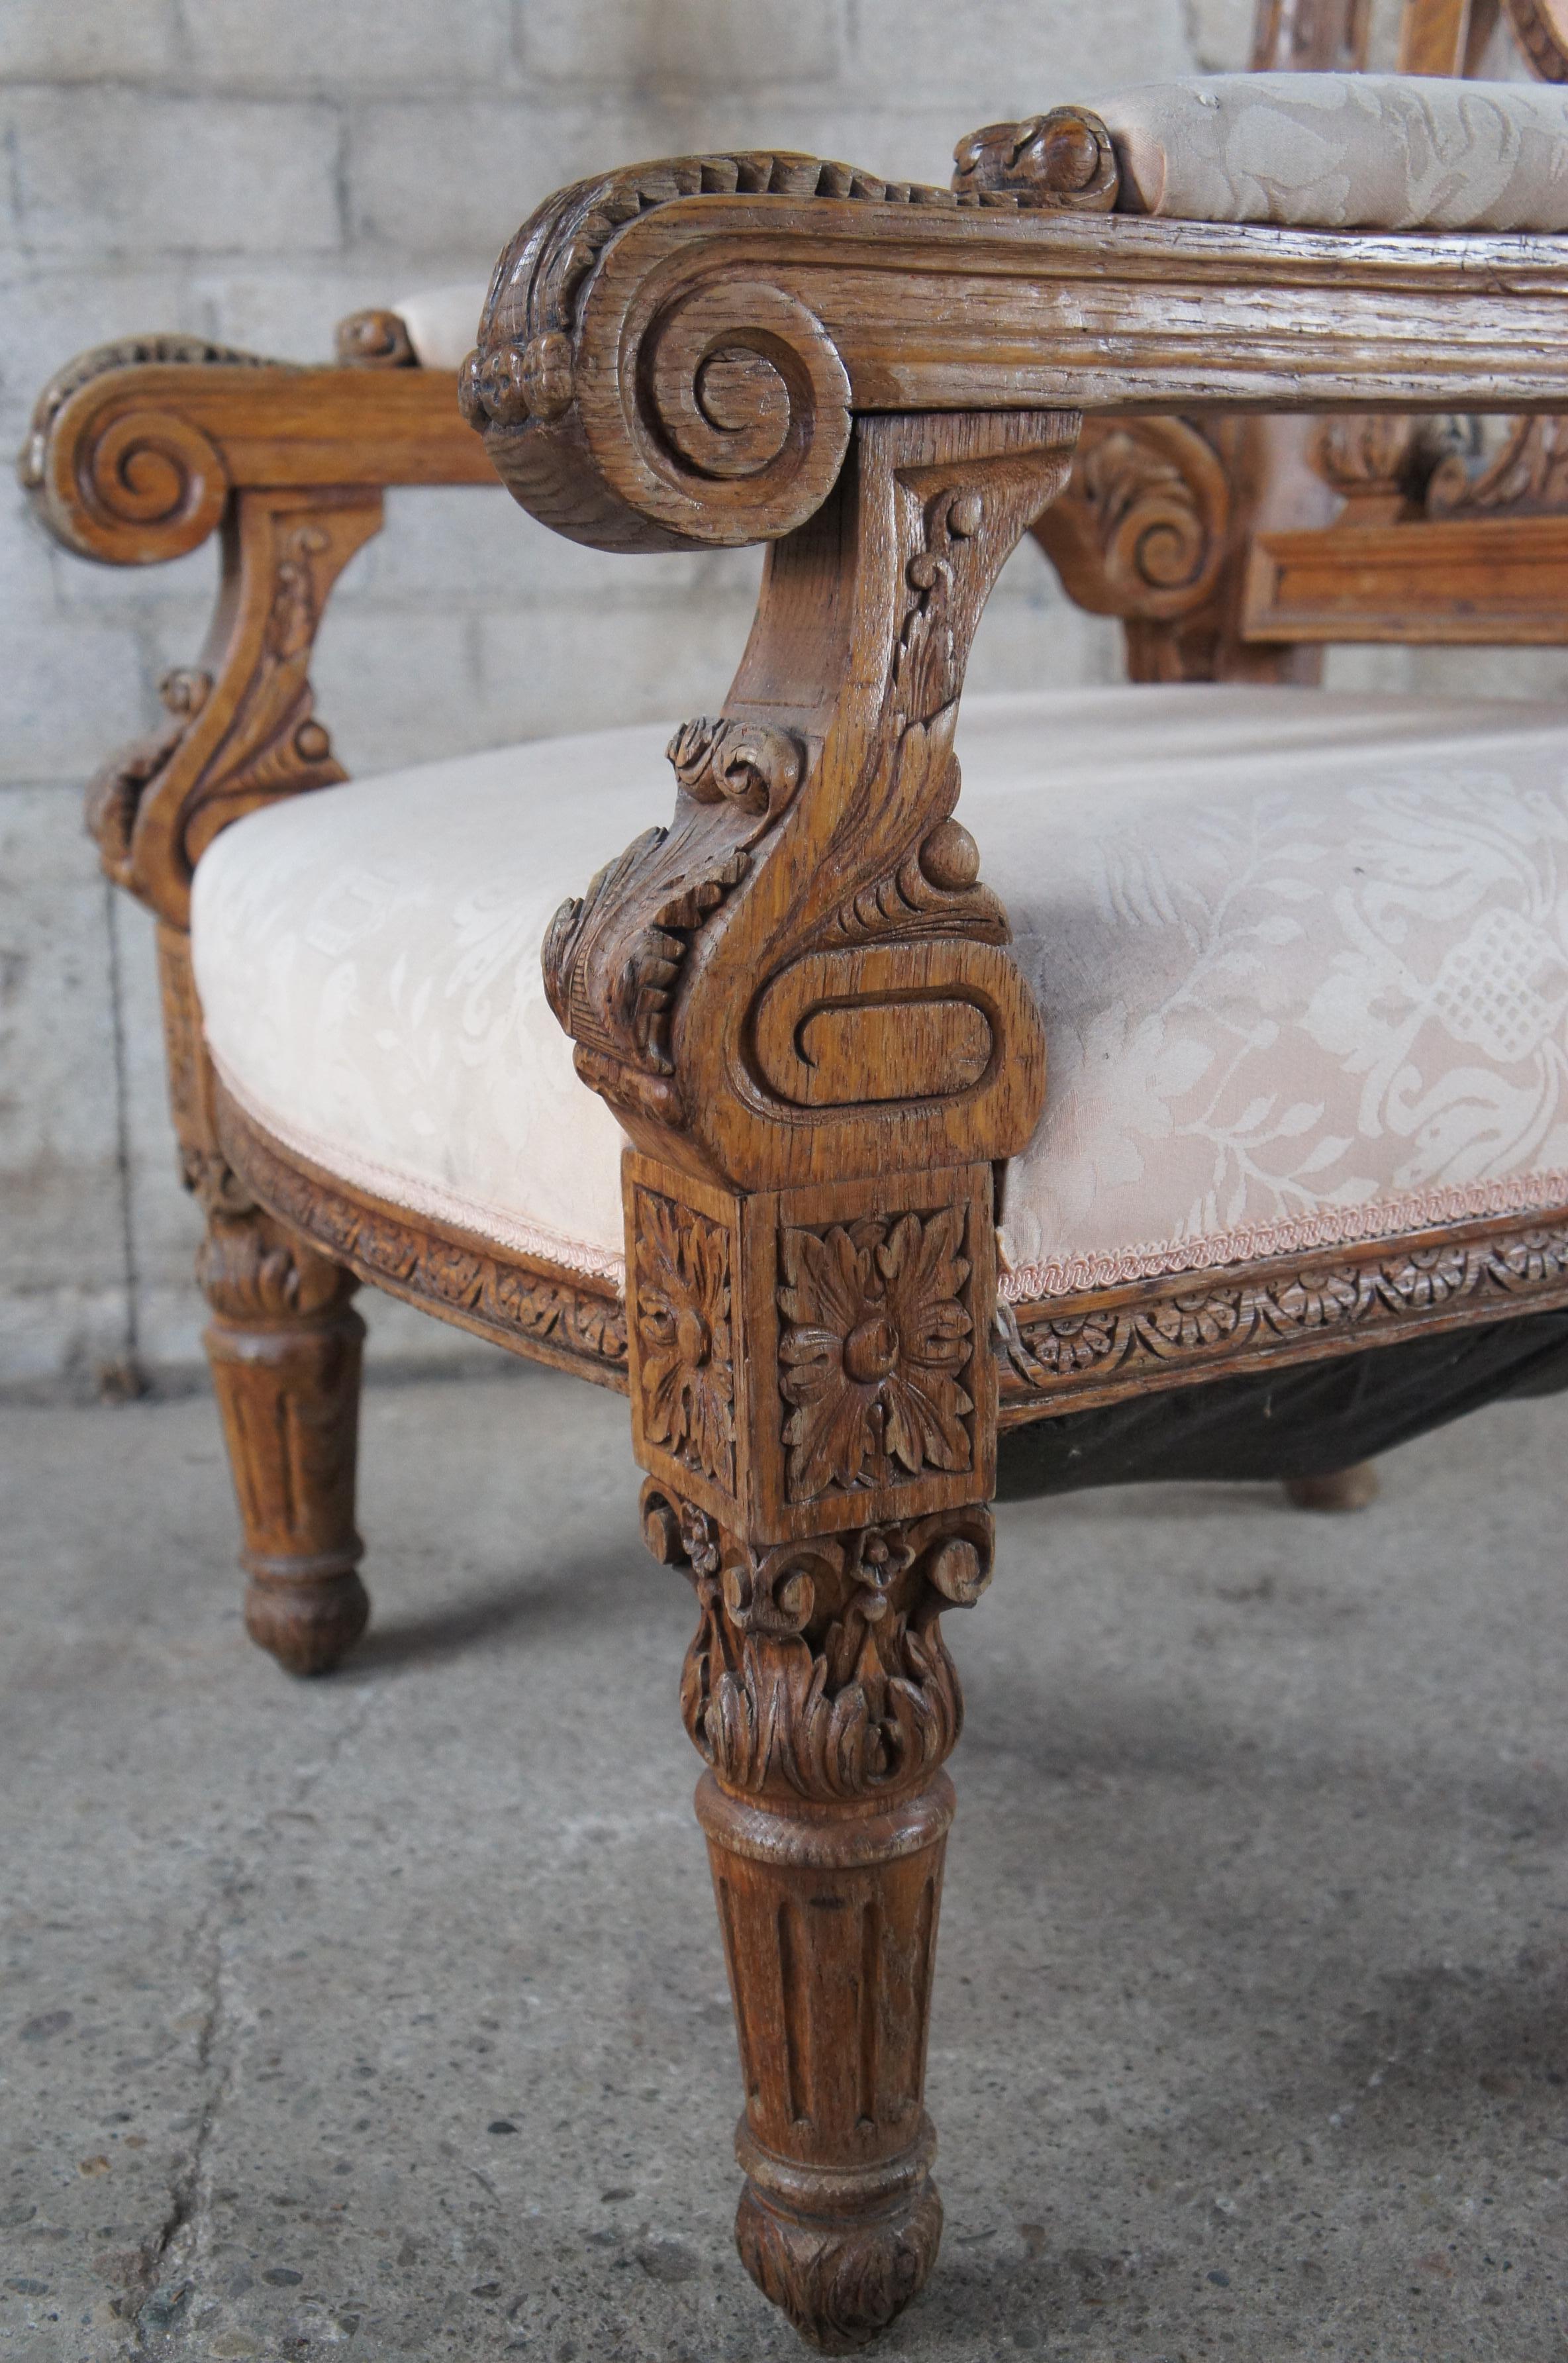 Monumental Antique Victorian Ornate Carved Oak Throne Arm Chair 58